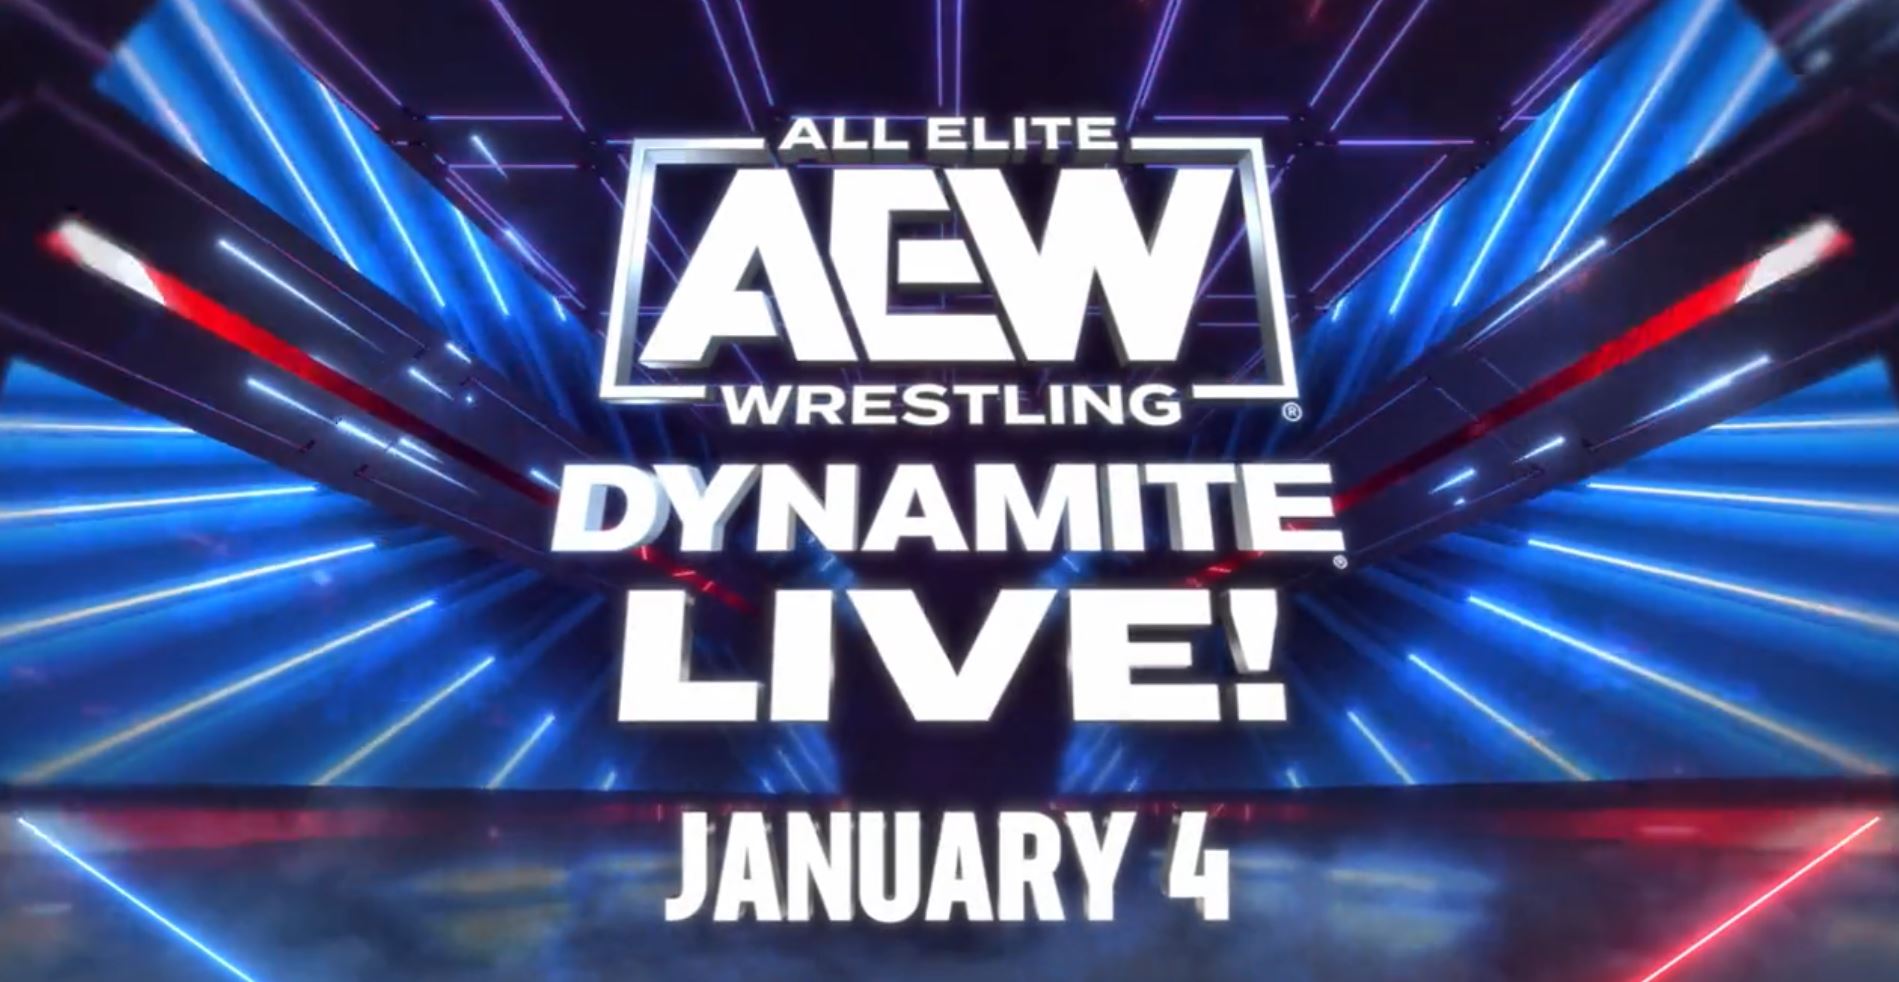 Top Star Added to Loaded LineUp for the First AEW Dynamite of 2023